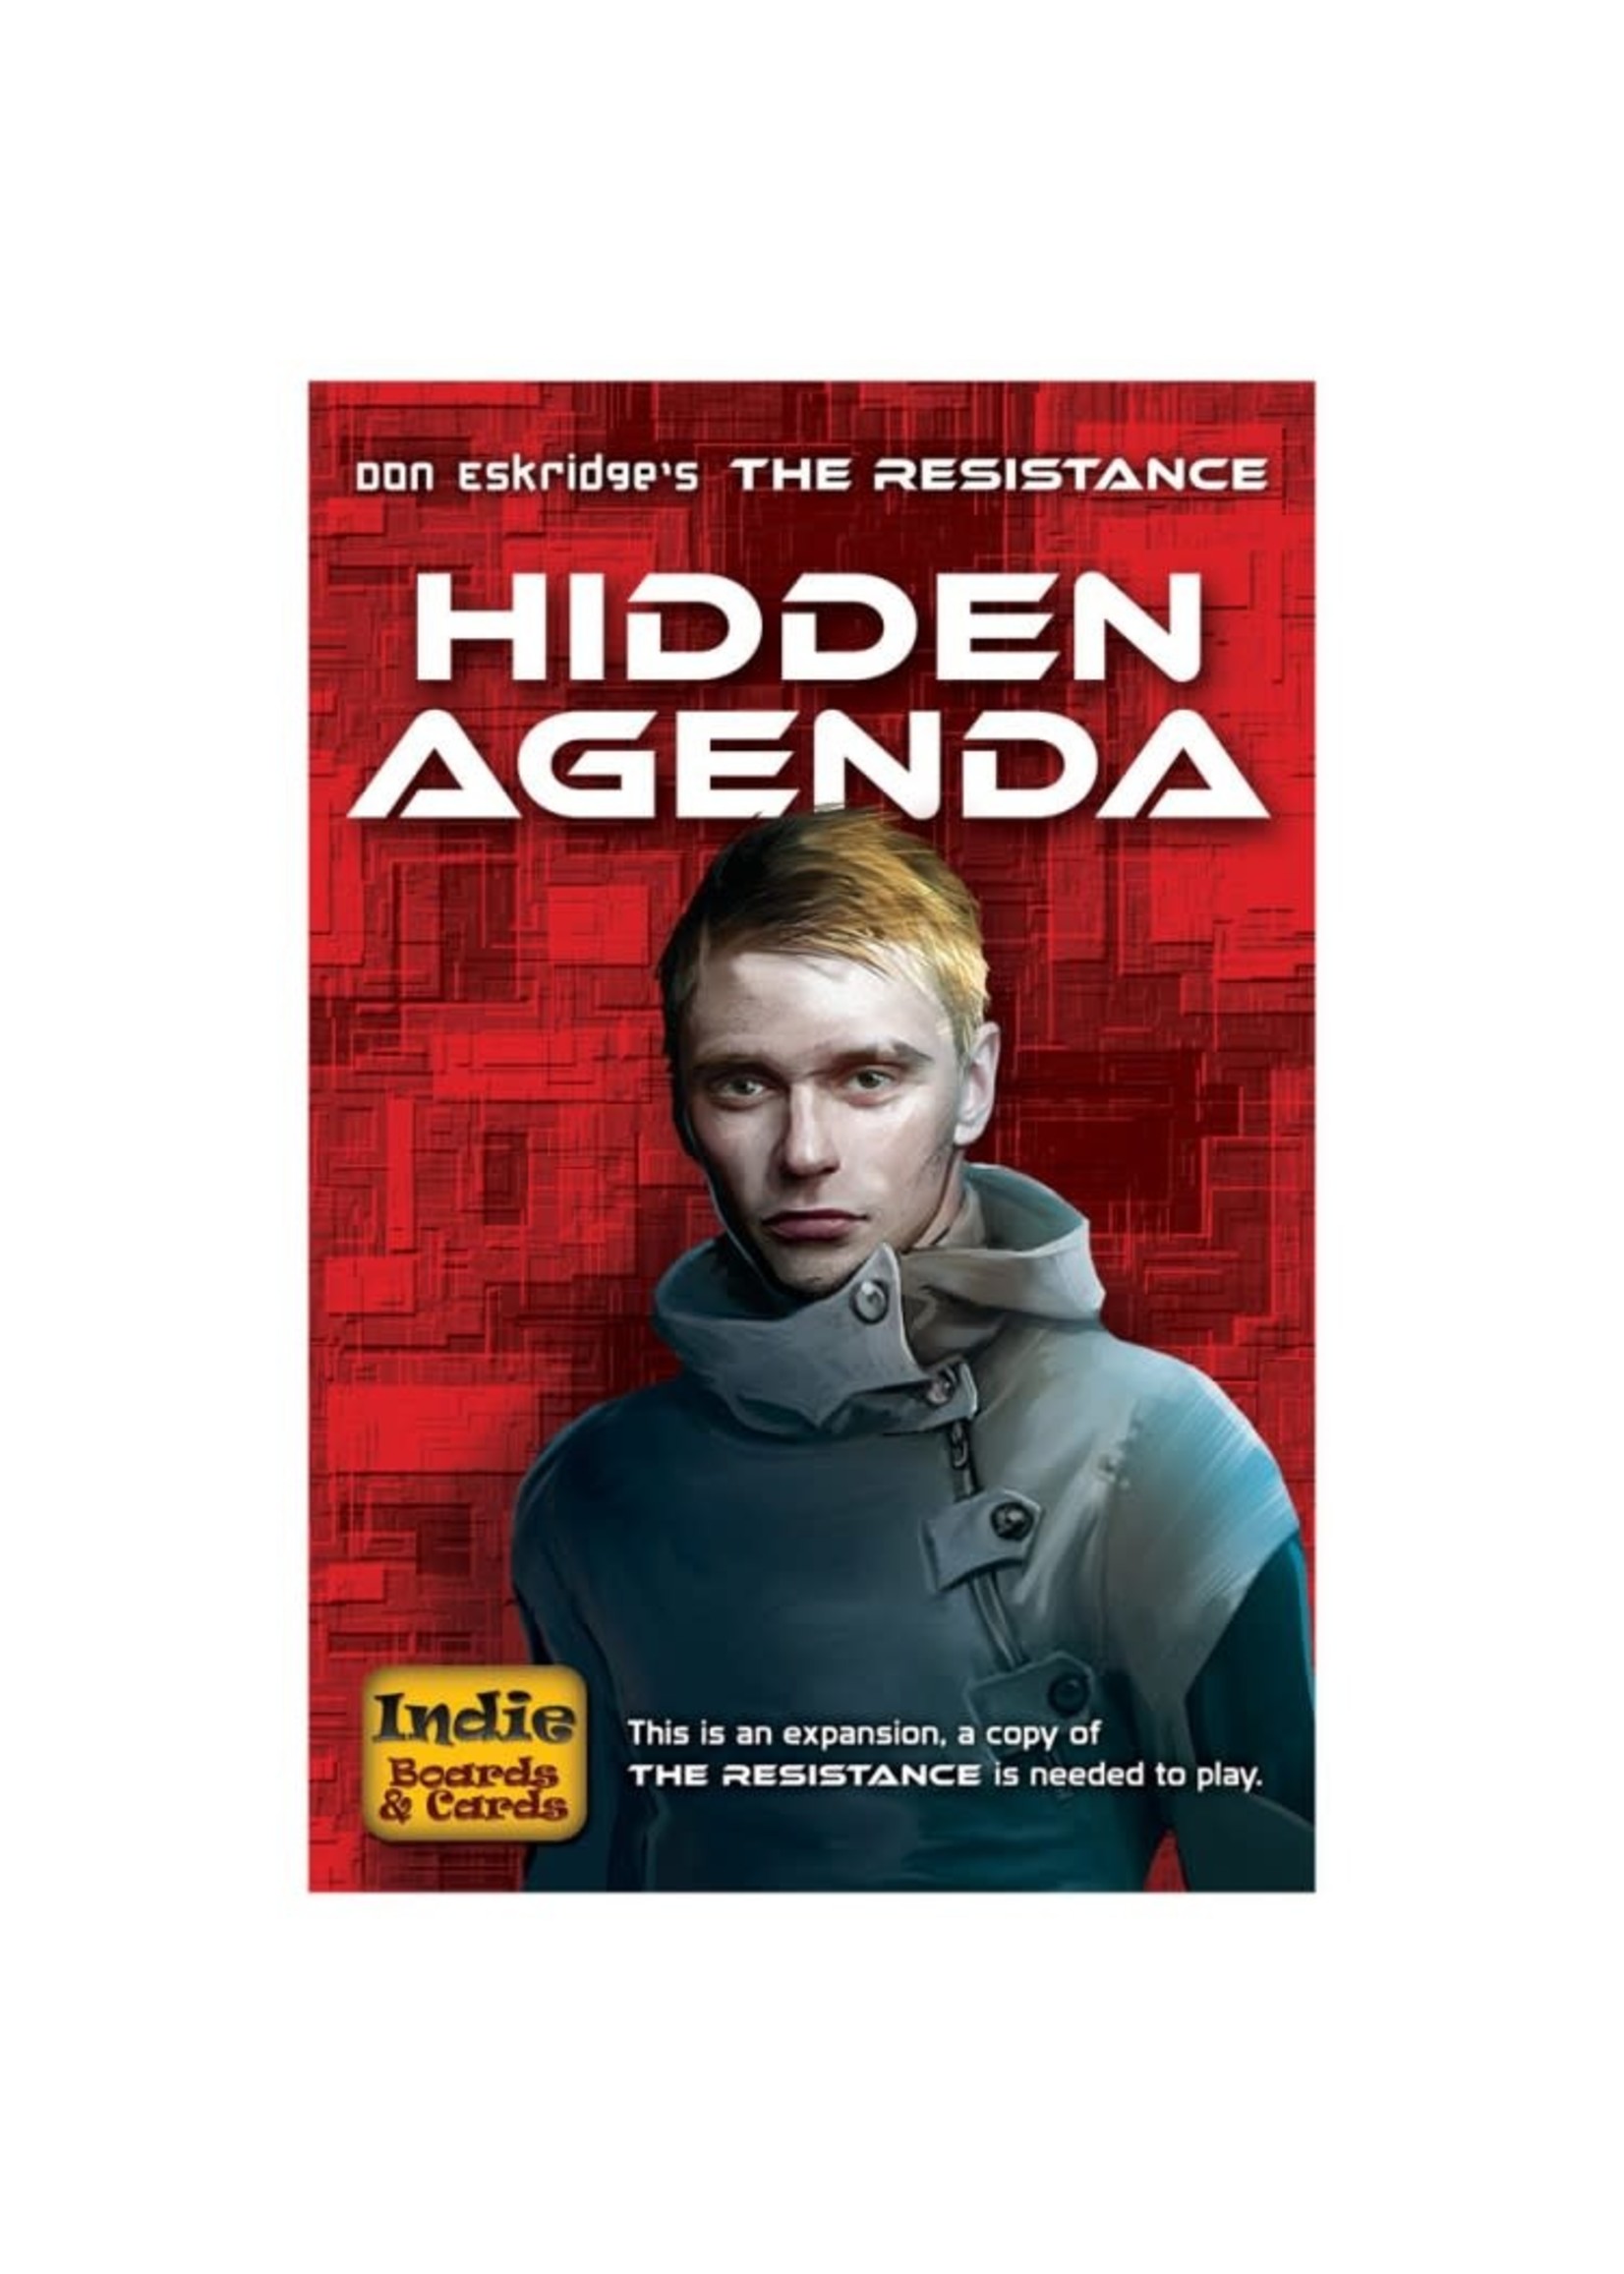 Indie Boards and Cards The Resistance Hidden Agenda